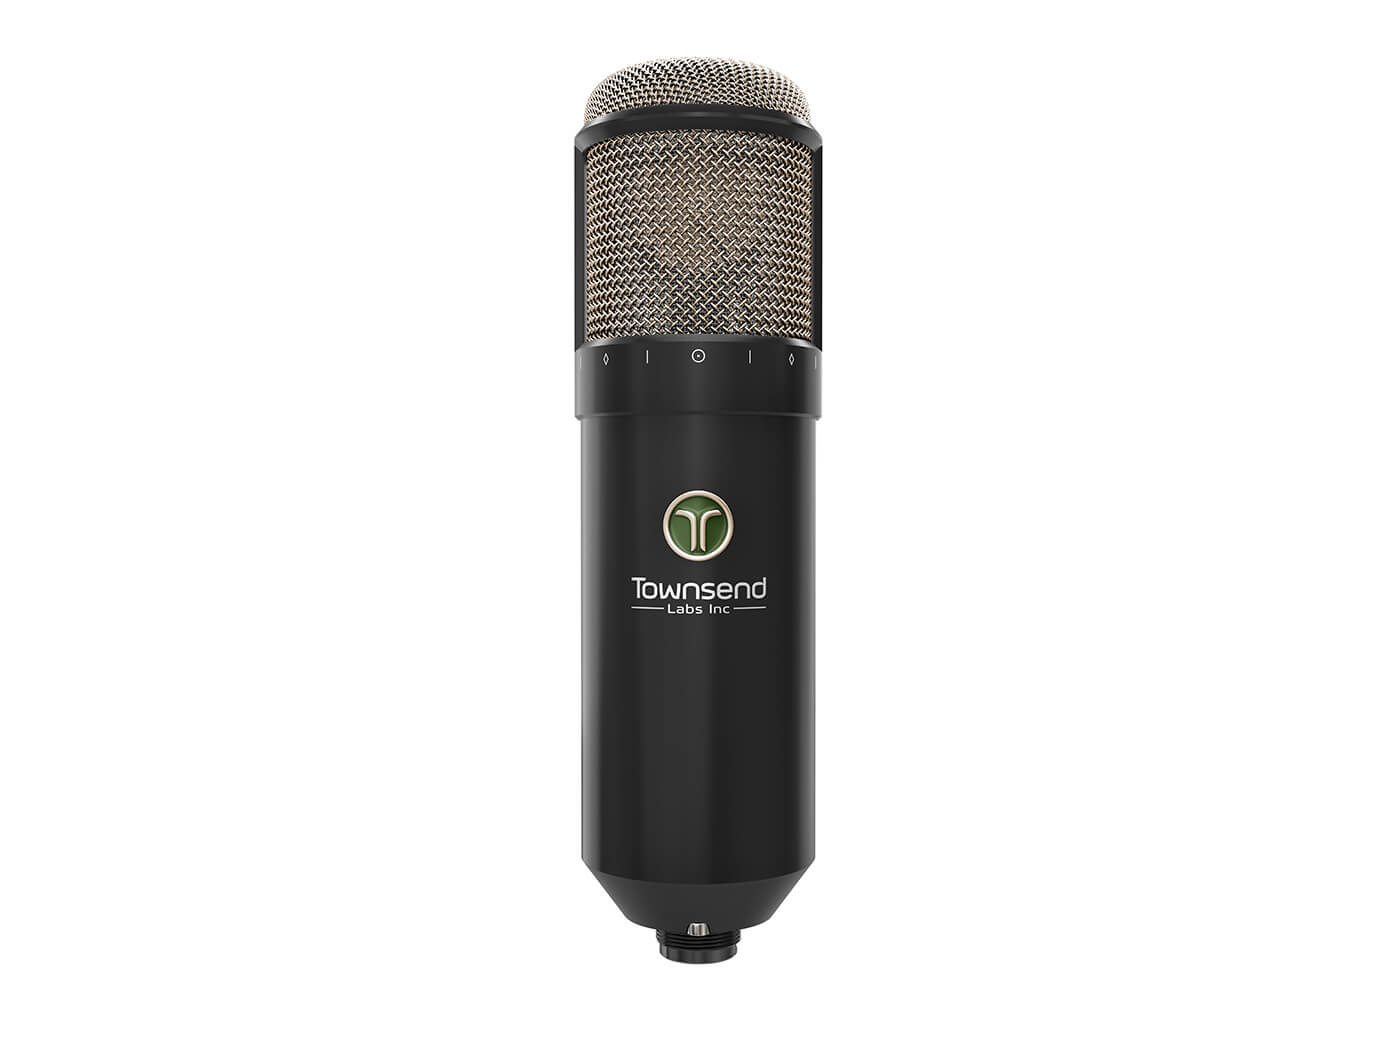 Townsend Labs Sphere L22 microphone review: Game-changing 